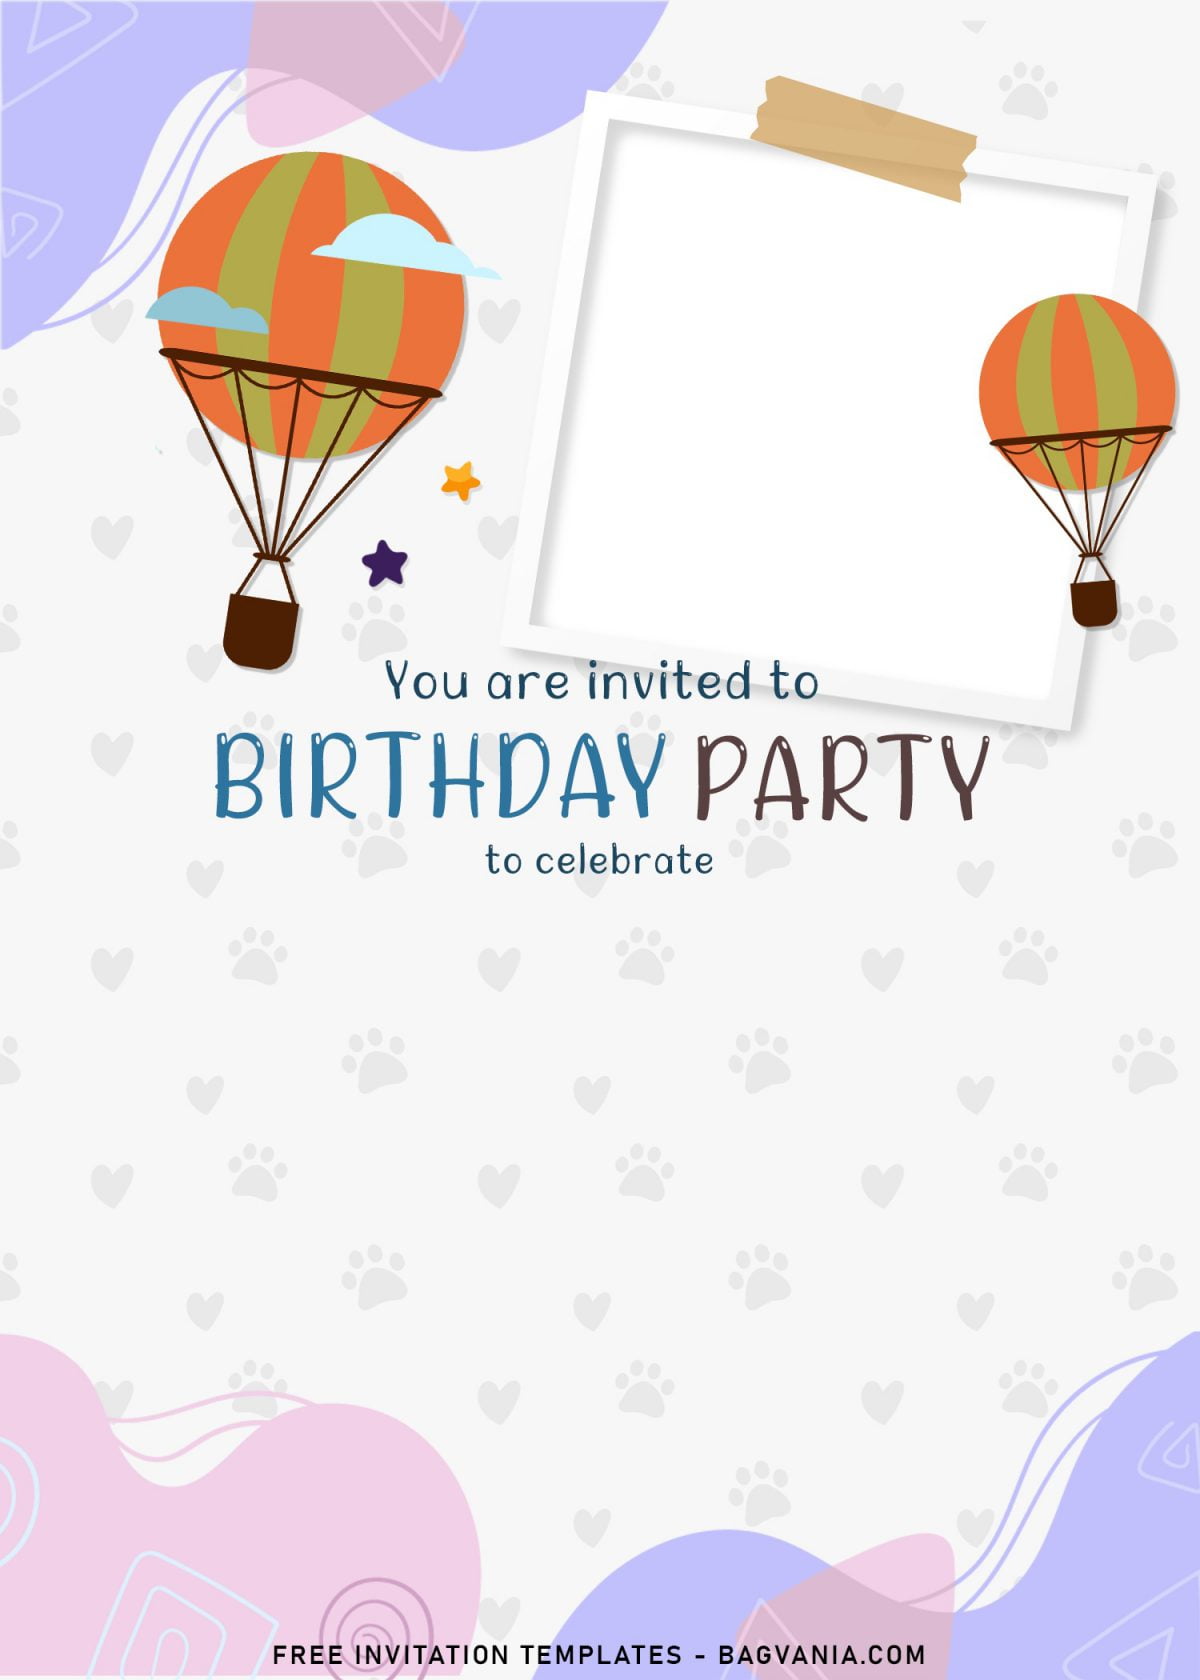 8+ Colorful Hand Drawn Birthday Invitation Templates For Your Kid's Birthday and has photo frame